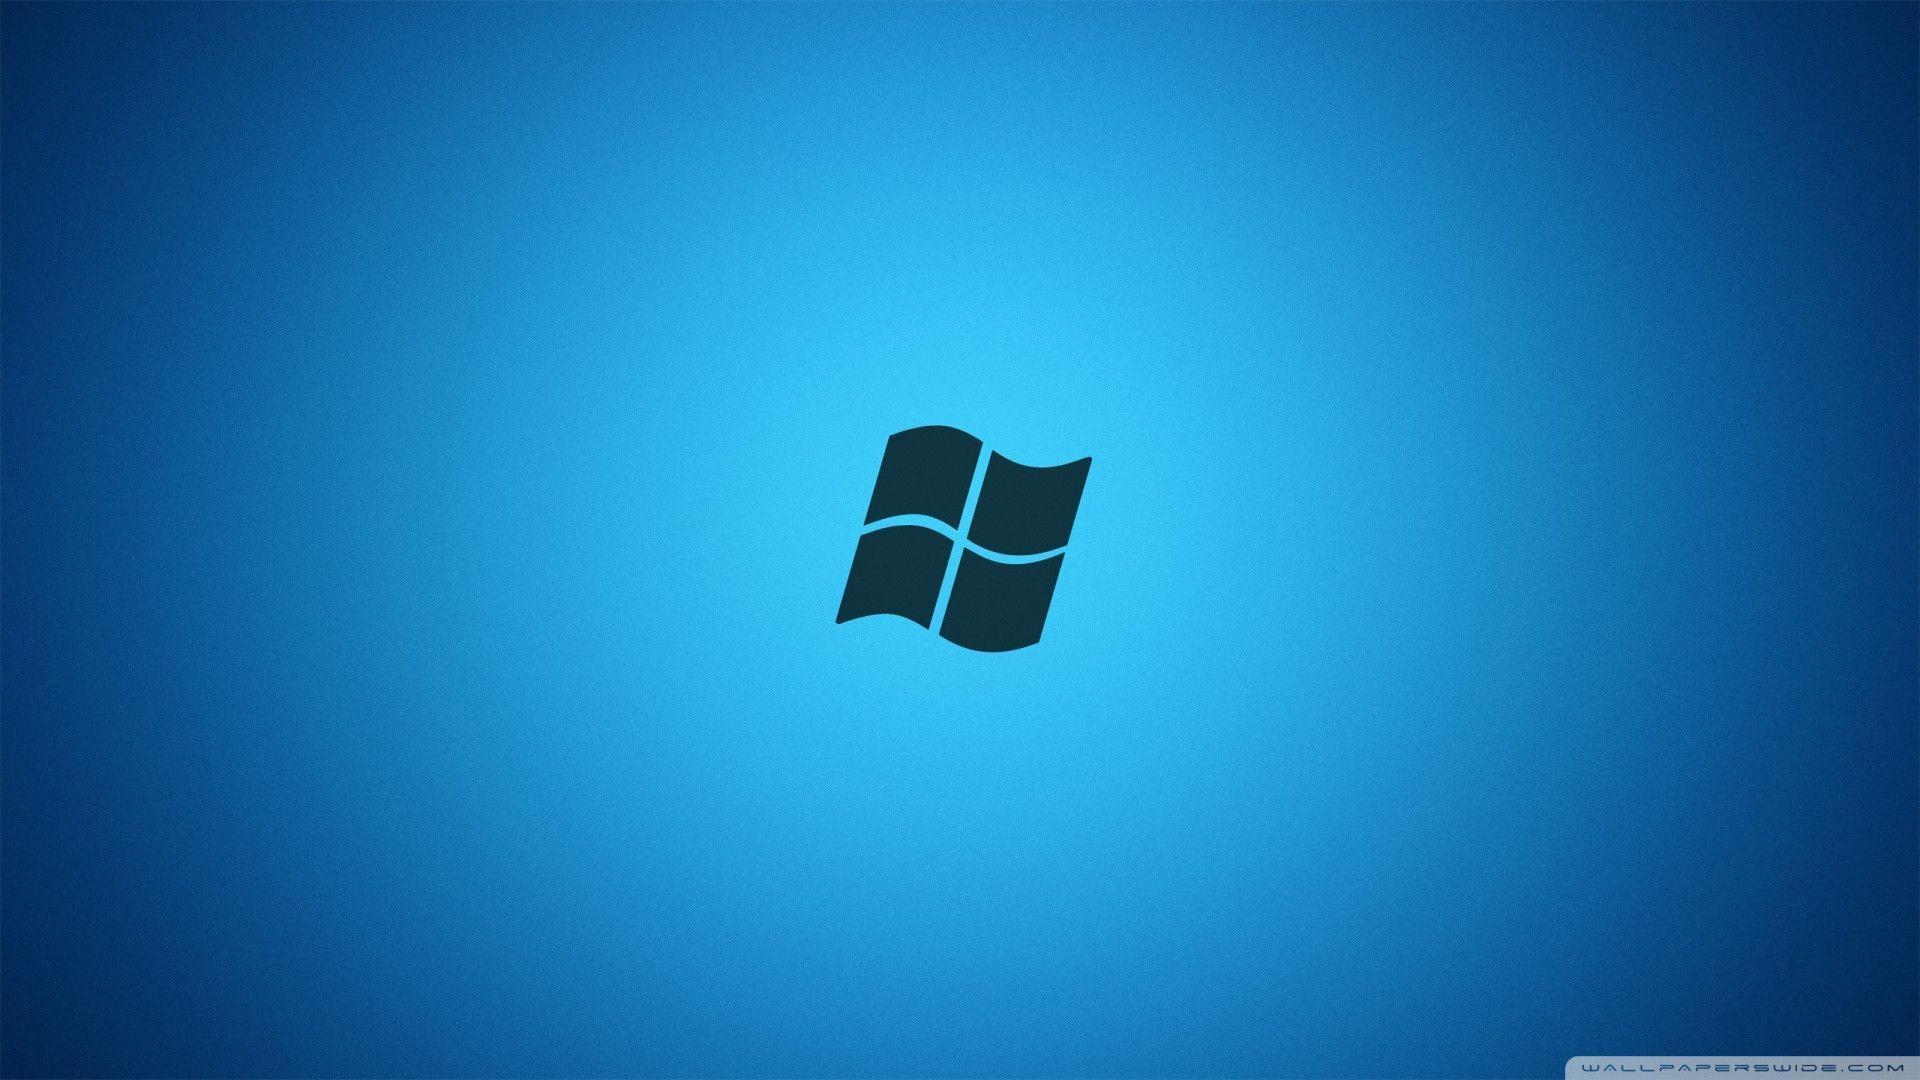 Windows Wallpapers 1920x1080 - Wallpaper Cave Full Hd Wallpapers For Windows 8 1920x1080